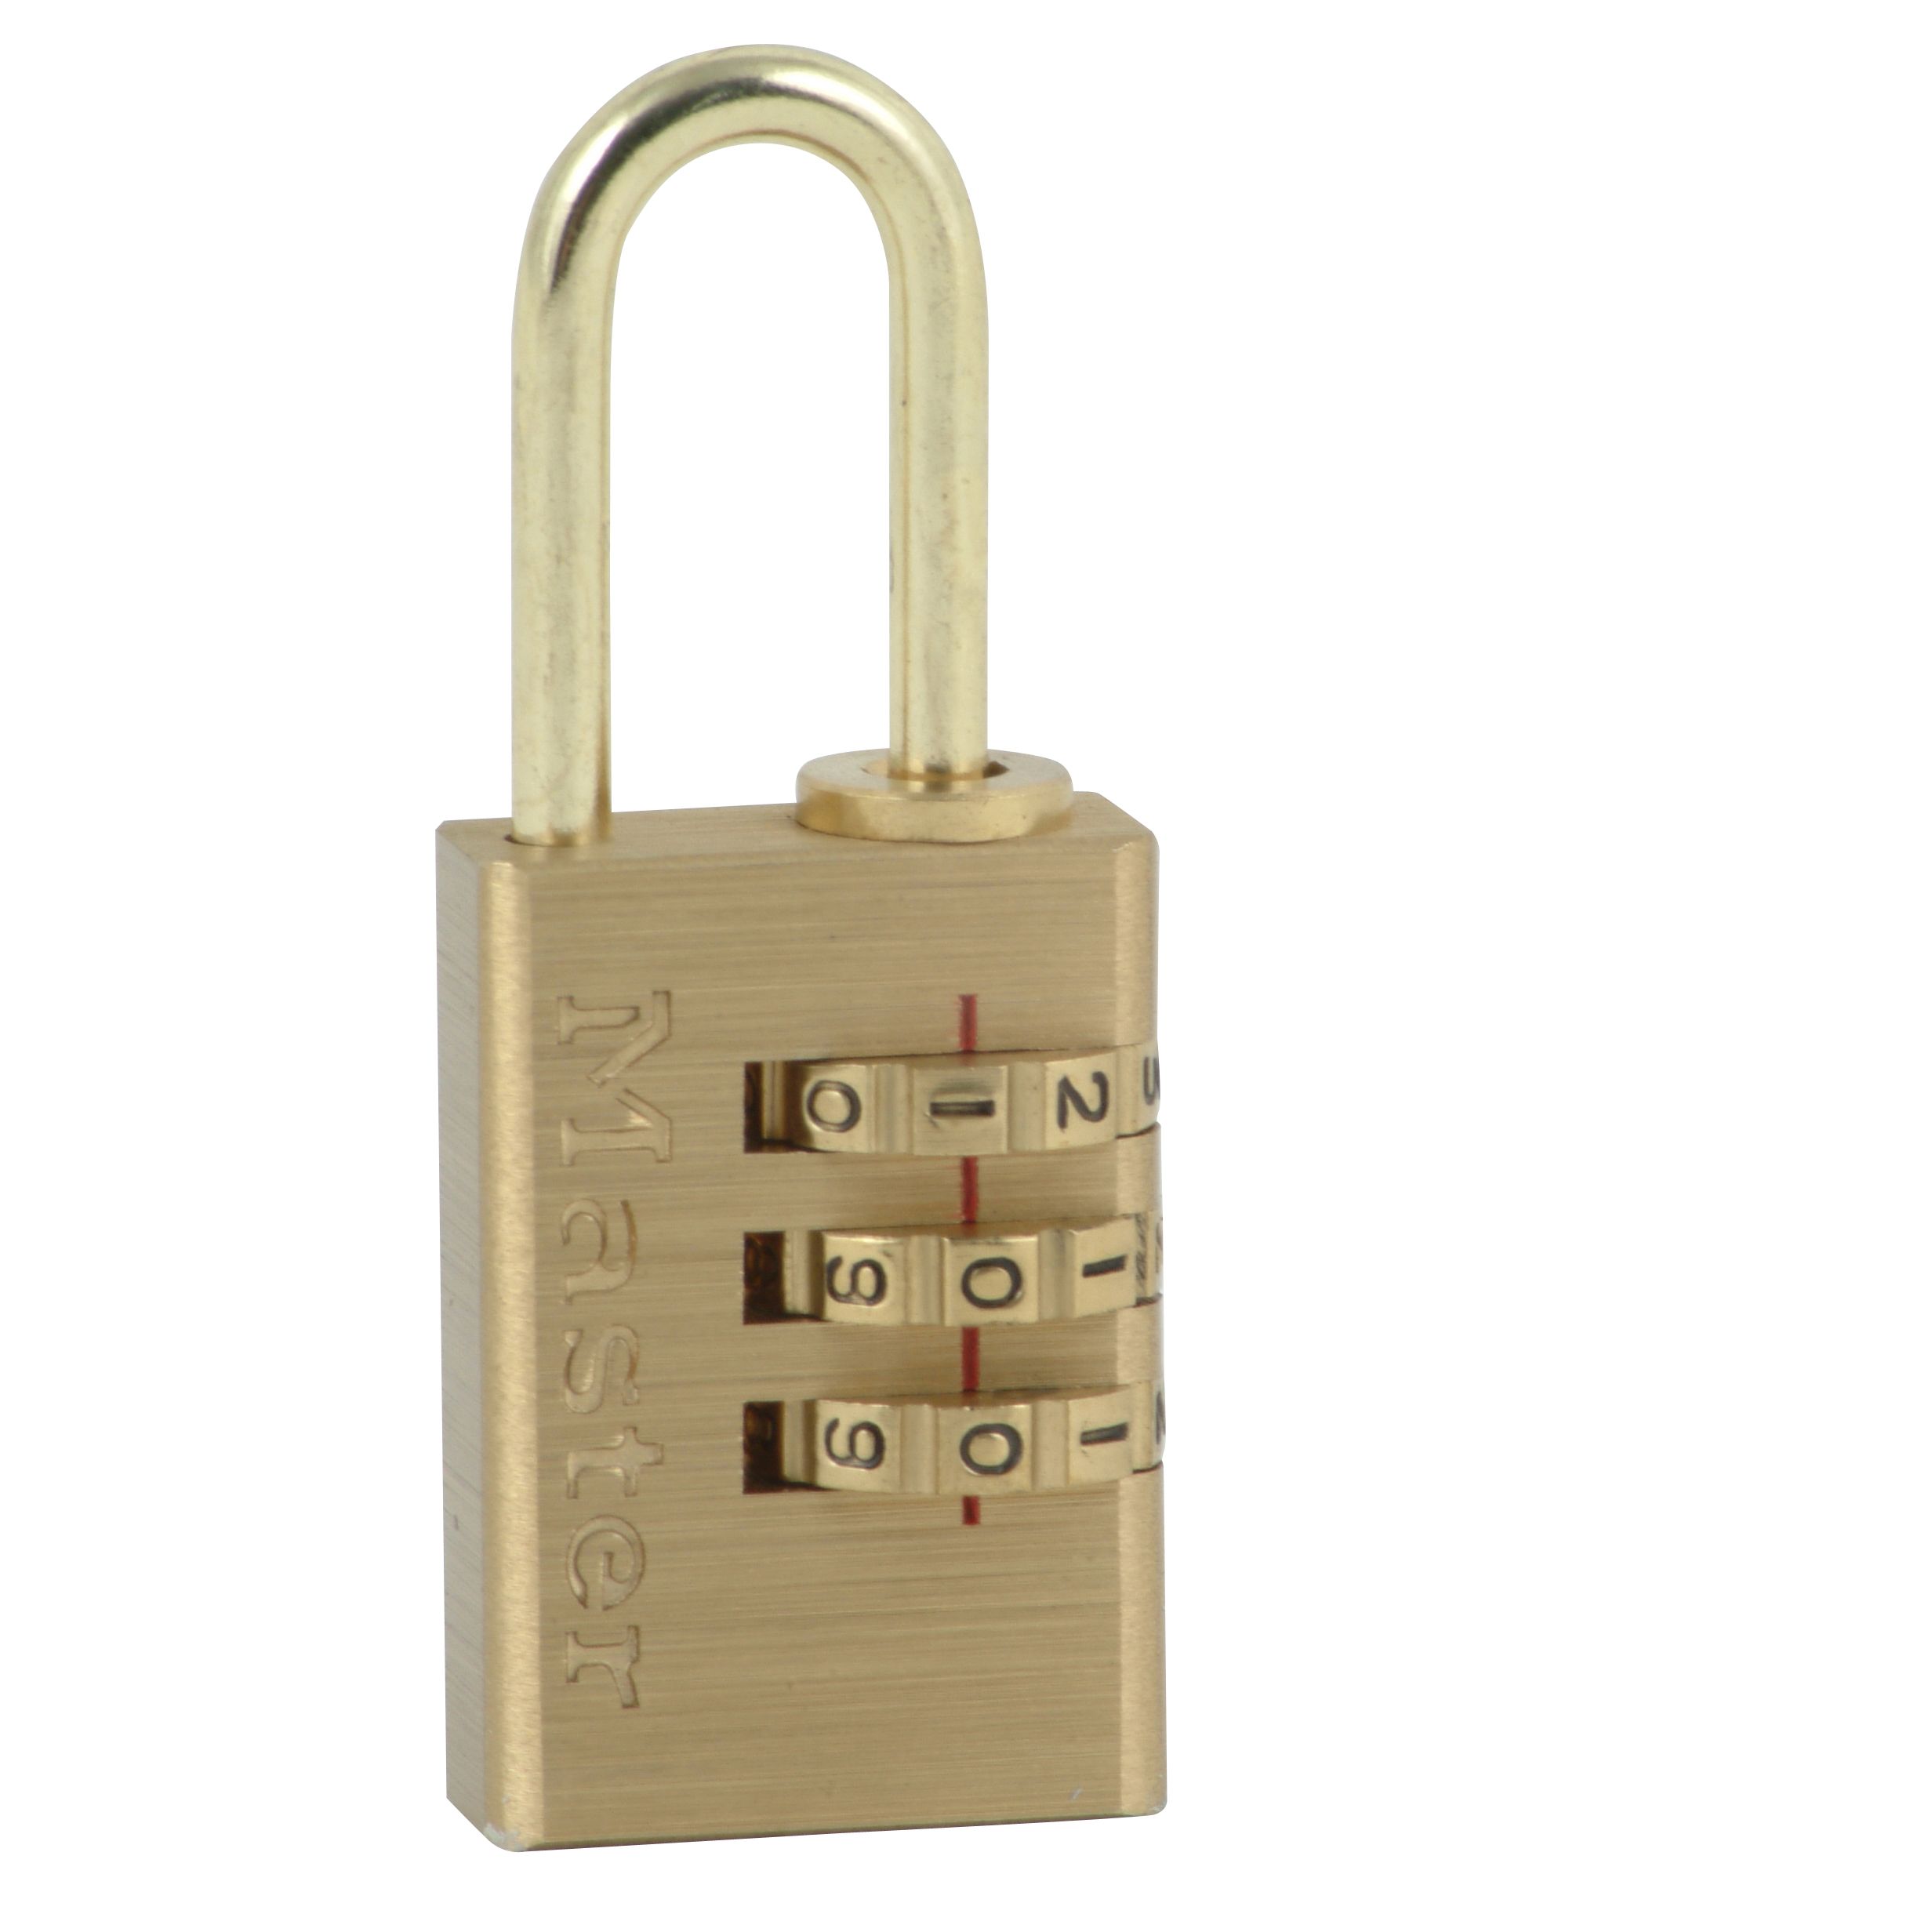 13/16 in. Set-Your-Own Combination Lock